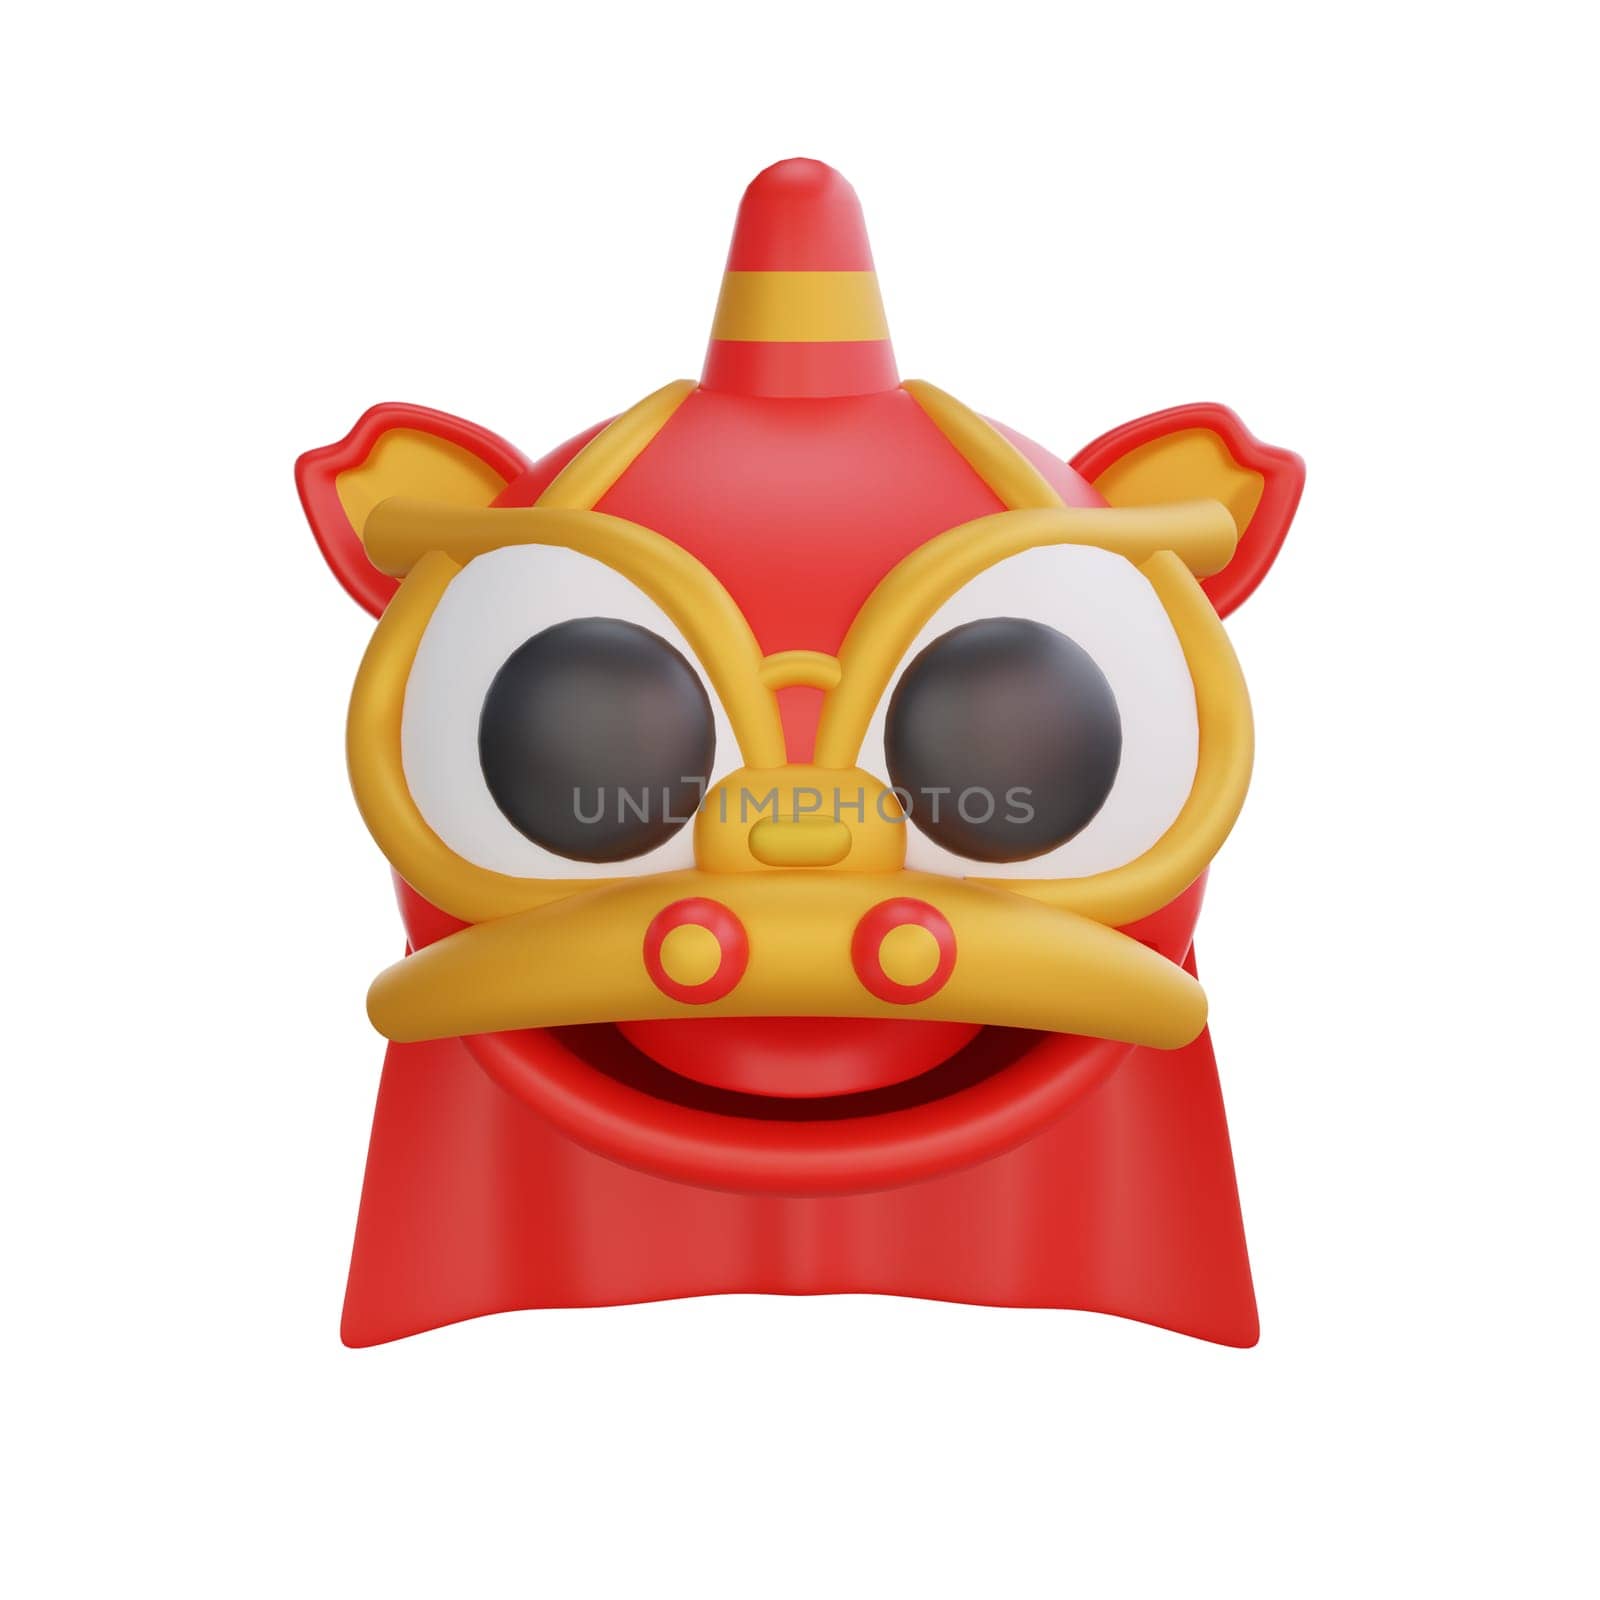 3D illustration of Barongsai icon, perfect for a Chinese New Year theme